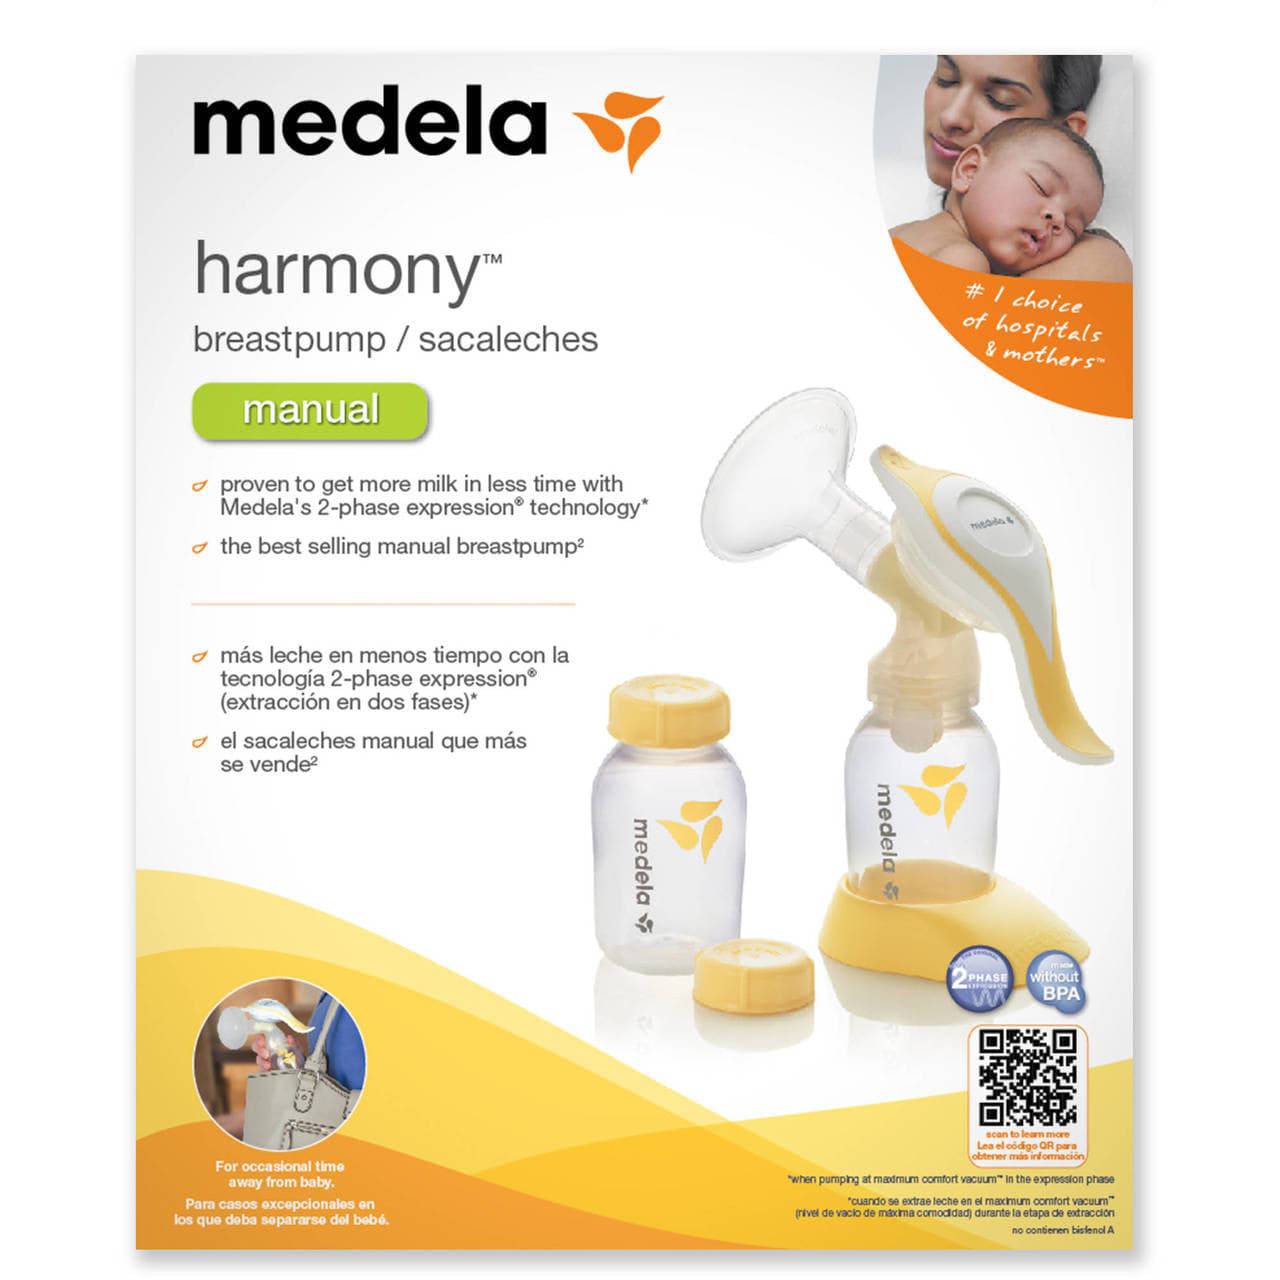 Medela Pump in Style with MaxFlow  Electric Breast Pump, Closed Syste –  ShopOrthopedics